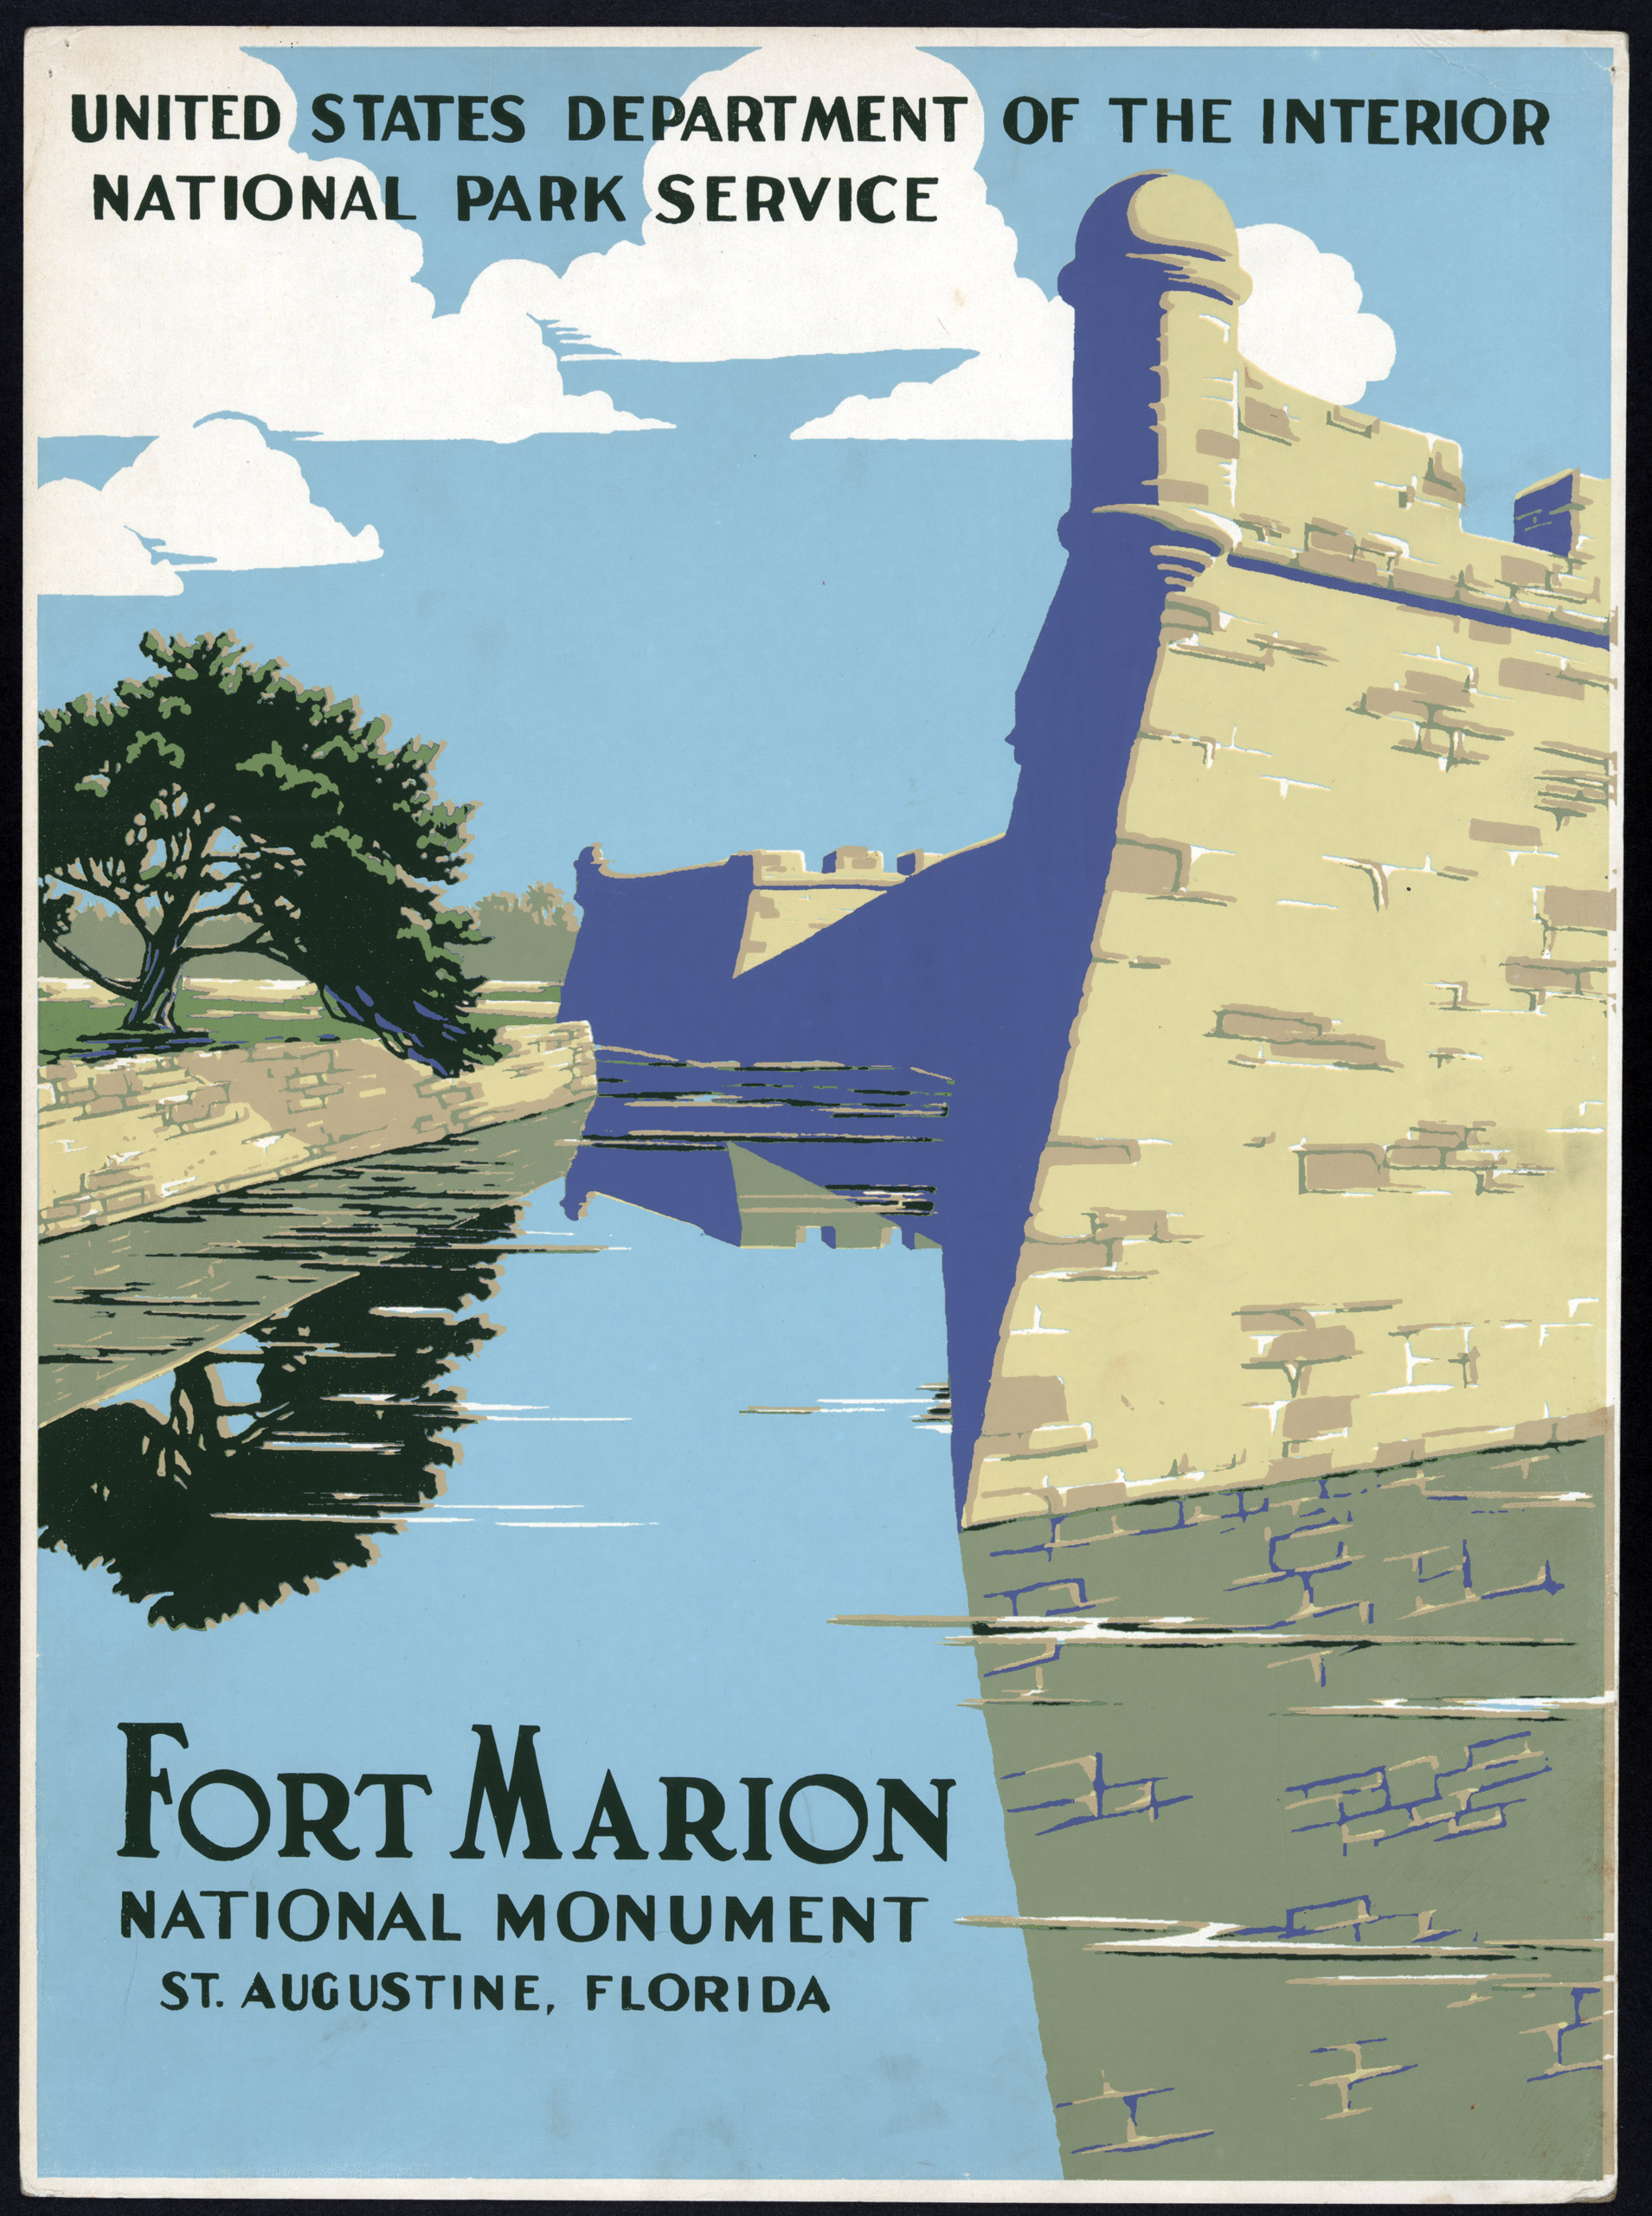 WPA National Parks poster from the Library of Congress.